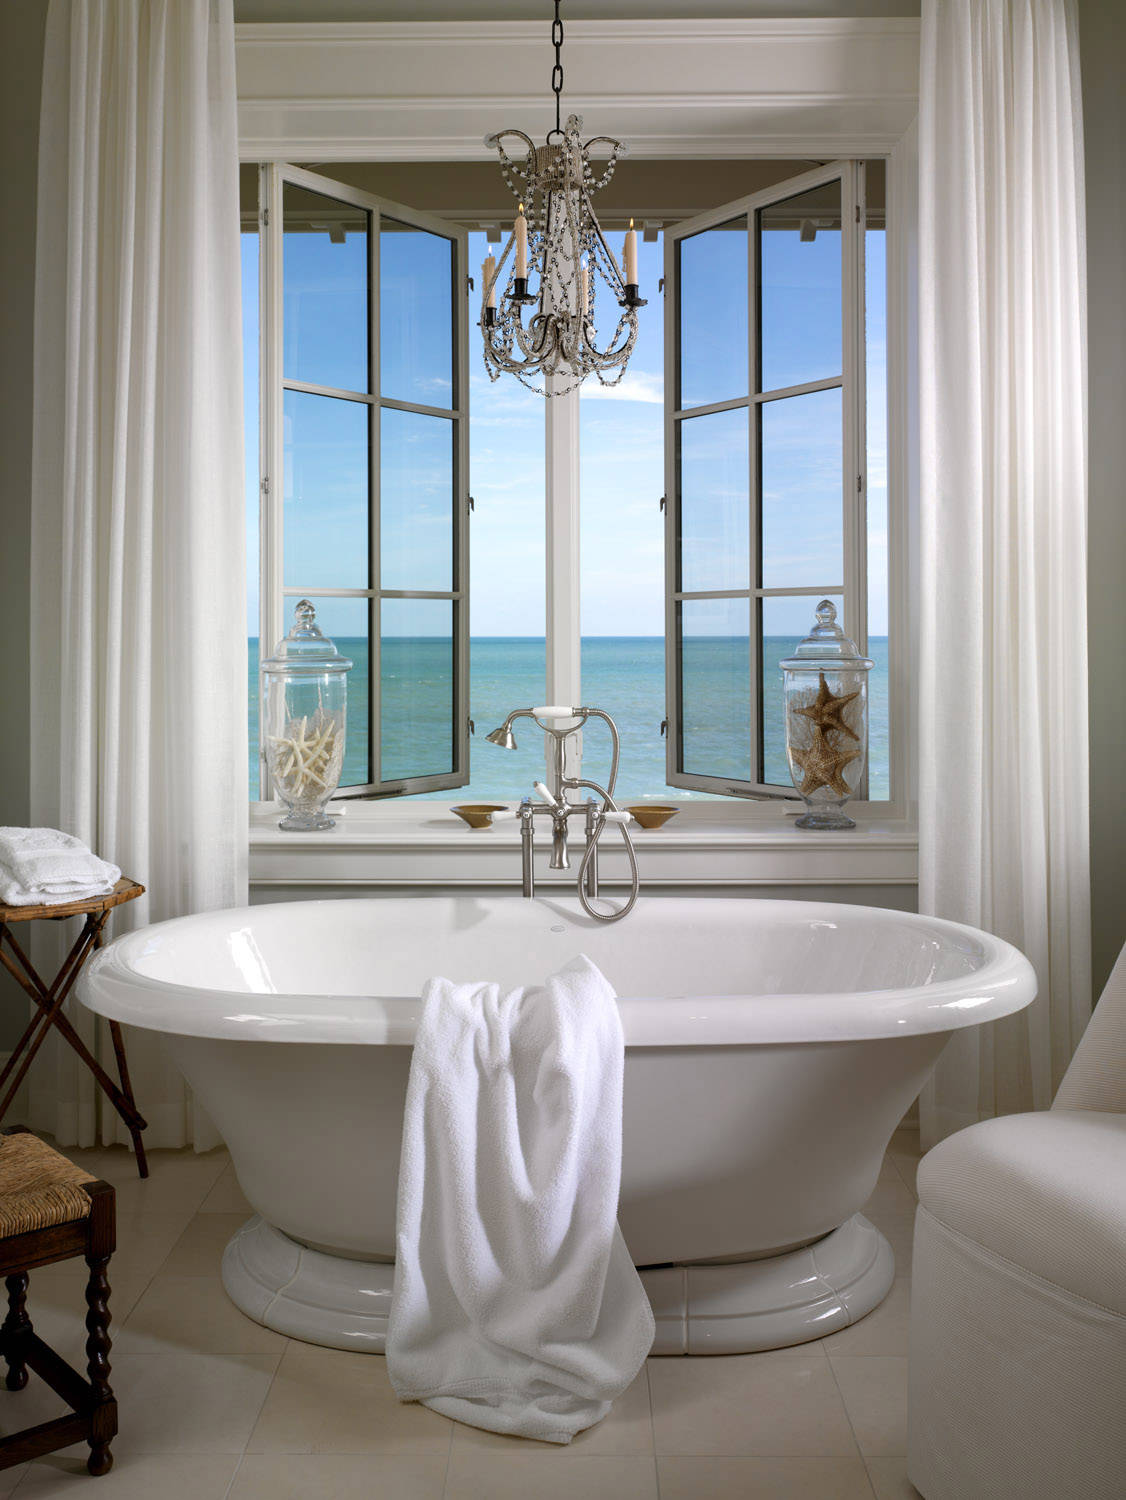 Sea View 1 Best +60 Ideas to Enhance Your Bathroom’s Luxuriousness - 45